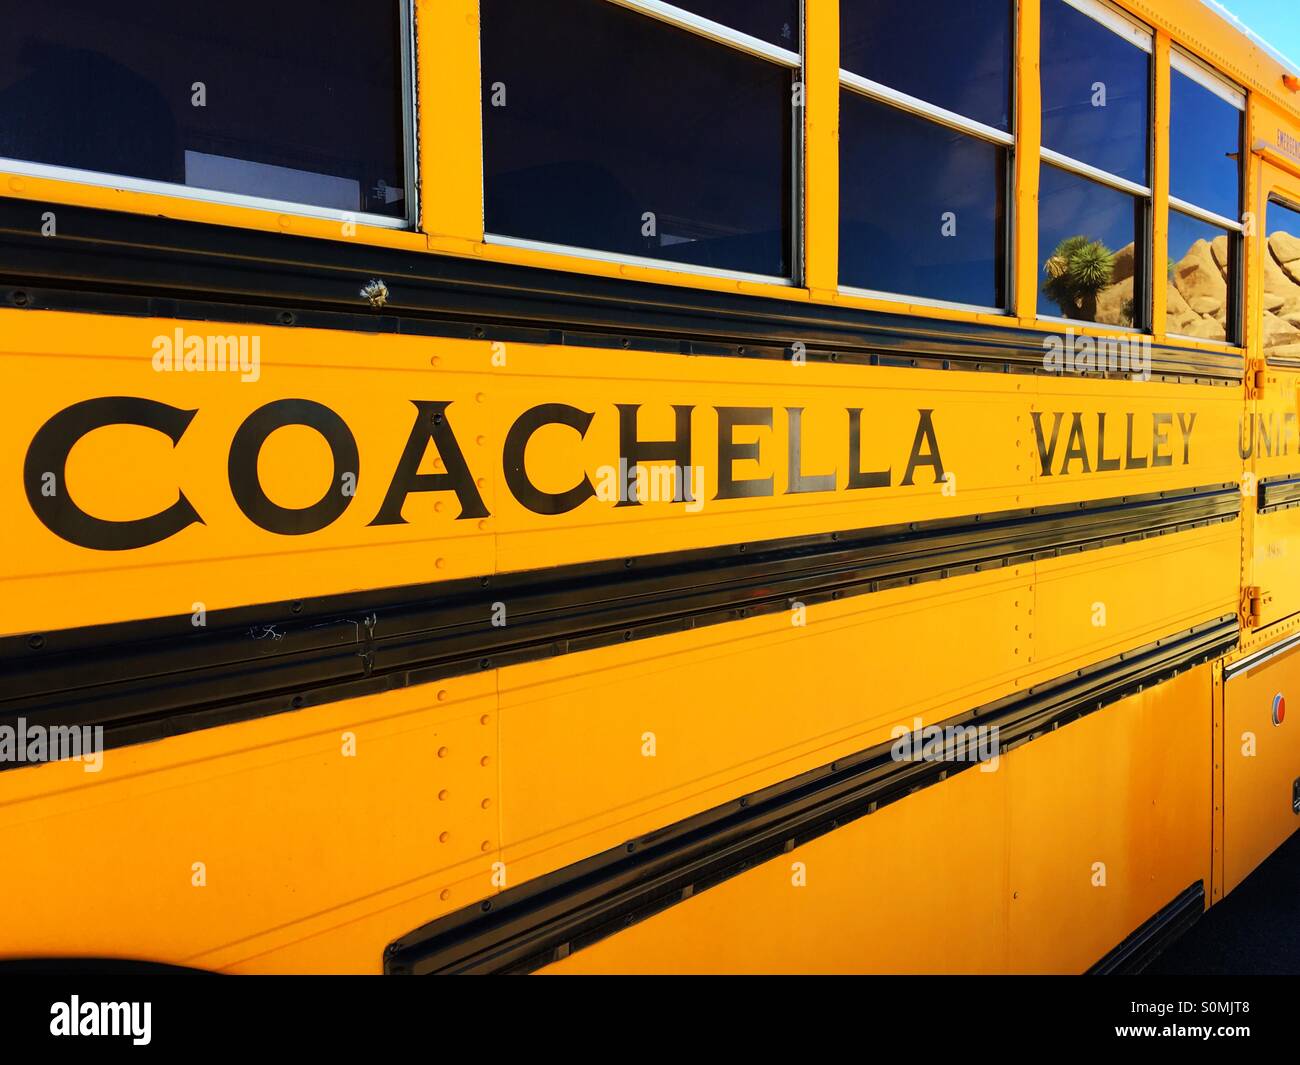 Coachella Valley yellow school bus with rocks and desert cactus reflecting in the windows in Southern California Stock Photo